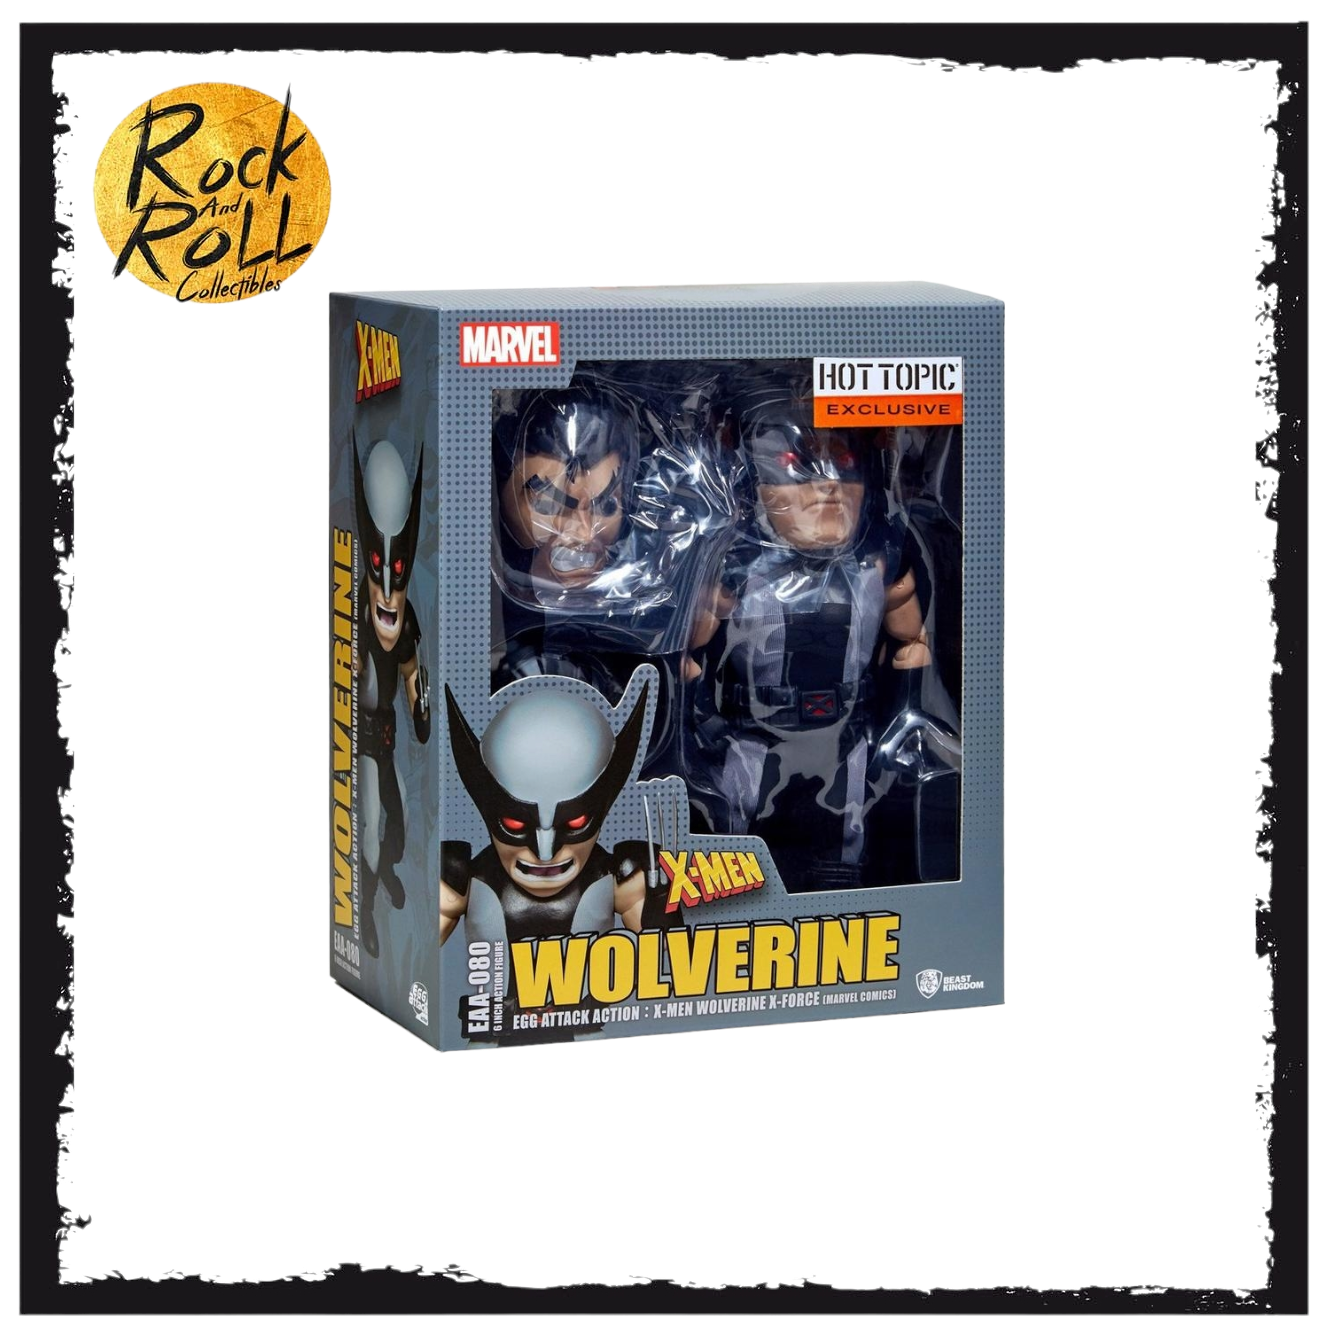 Egg Attack Action Marvel X-Men Wolverine X-Force Figure Hot Topic Exclusive